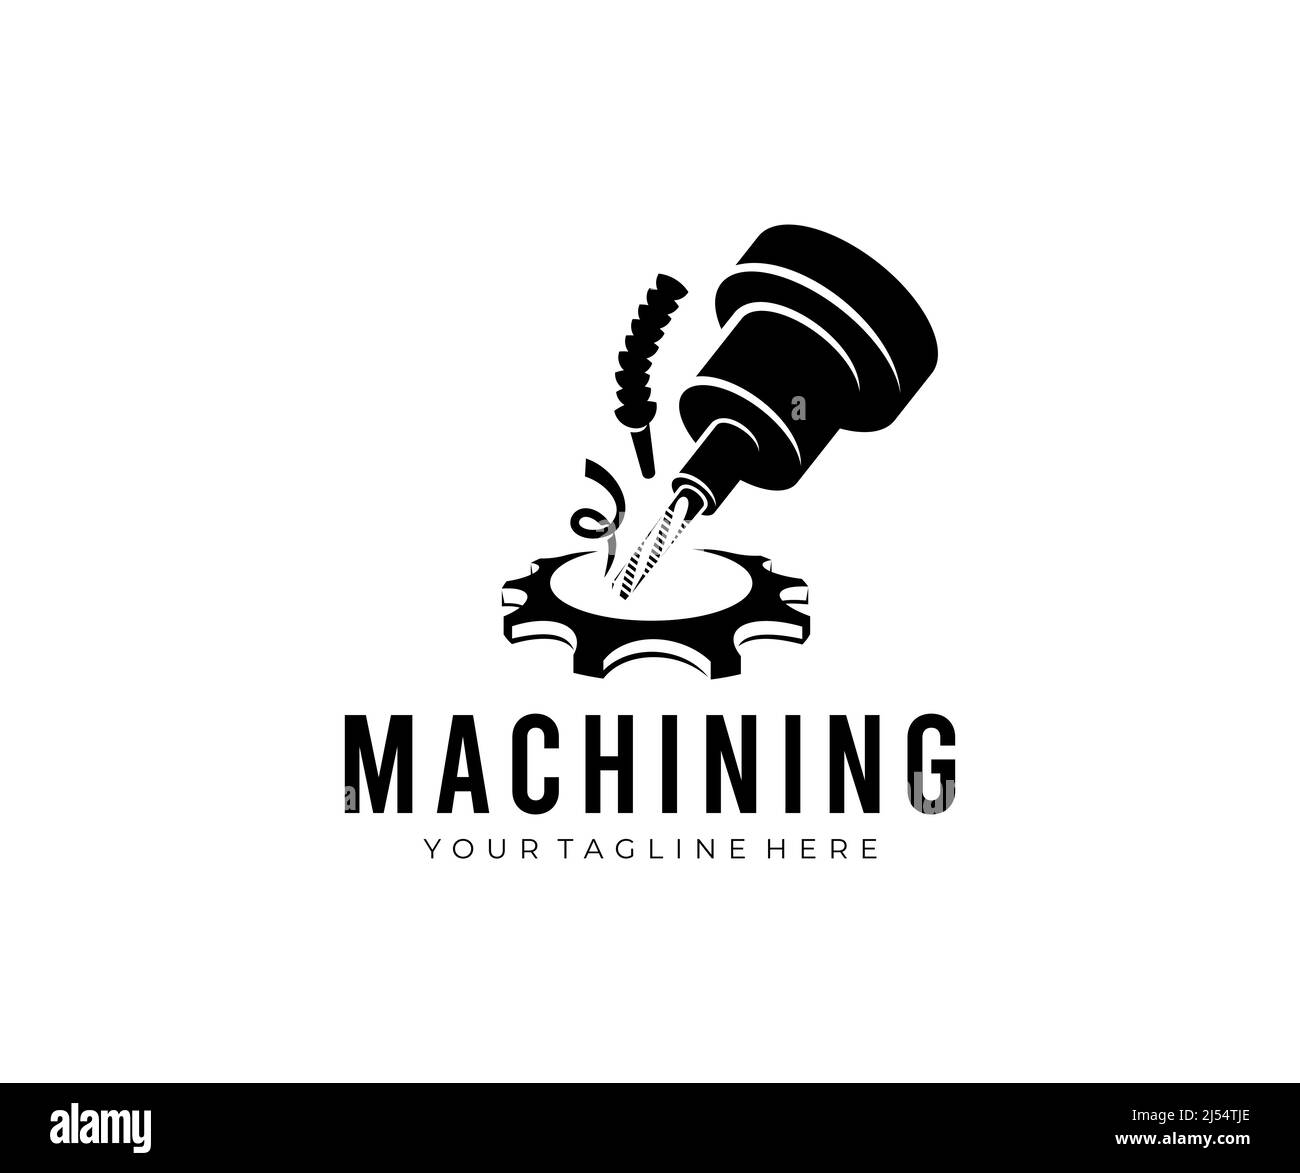 Machining, CNC milling machine makes a gear, logo design. Metalworking, coolant and lubrication in gear metalwork industry, vector design and illustra Stock Vector